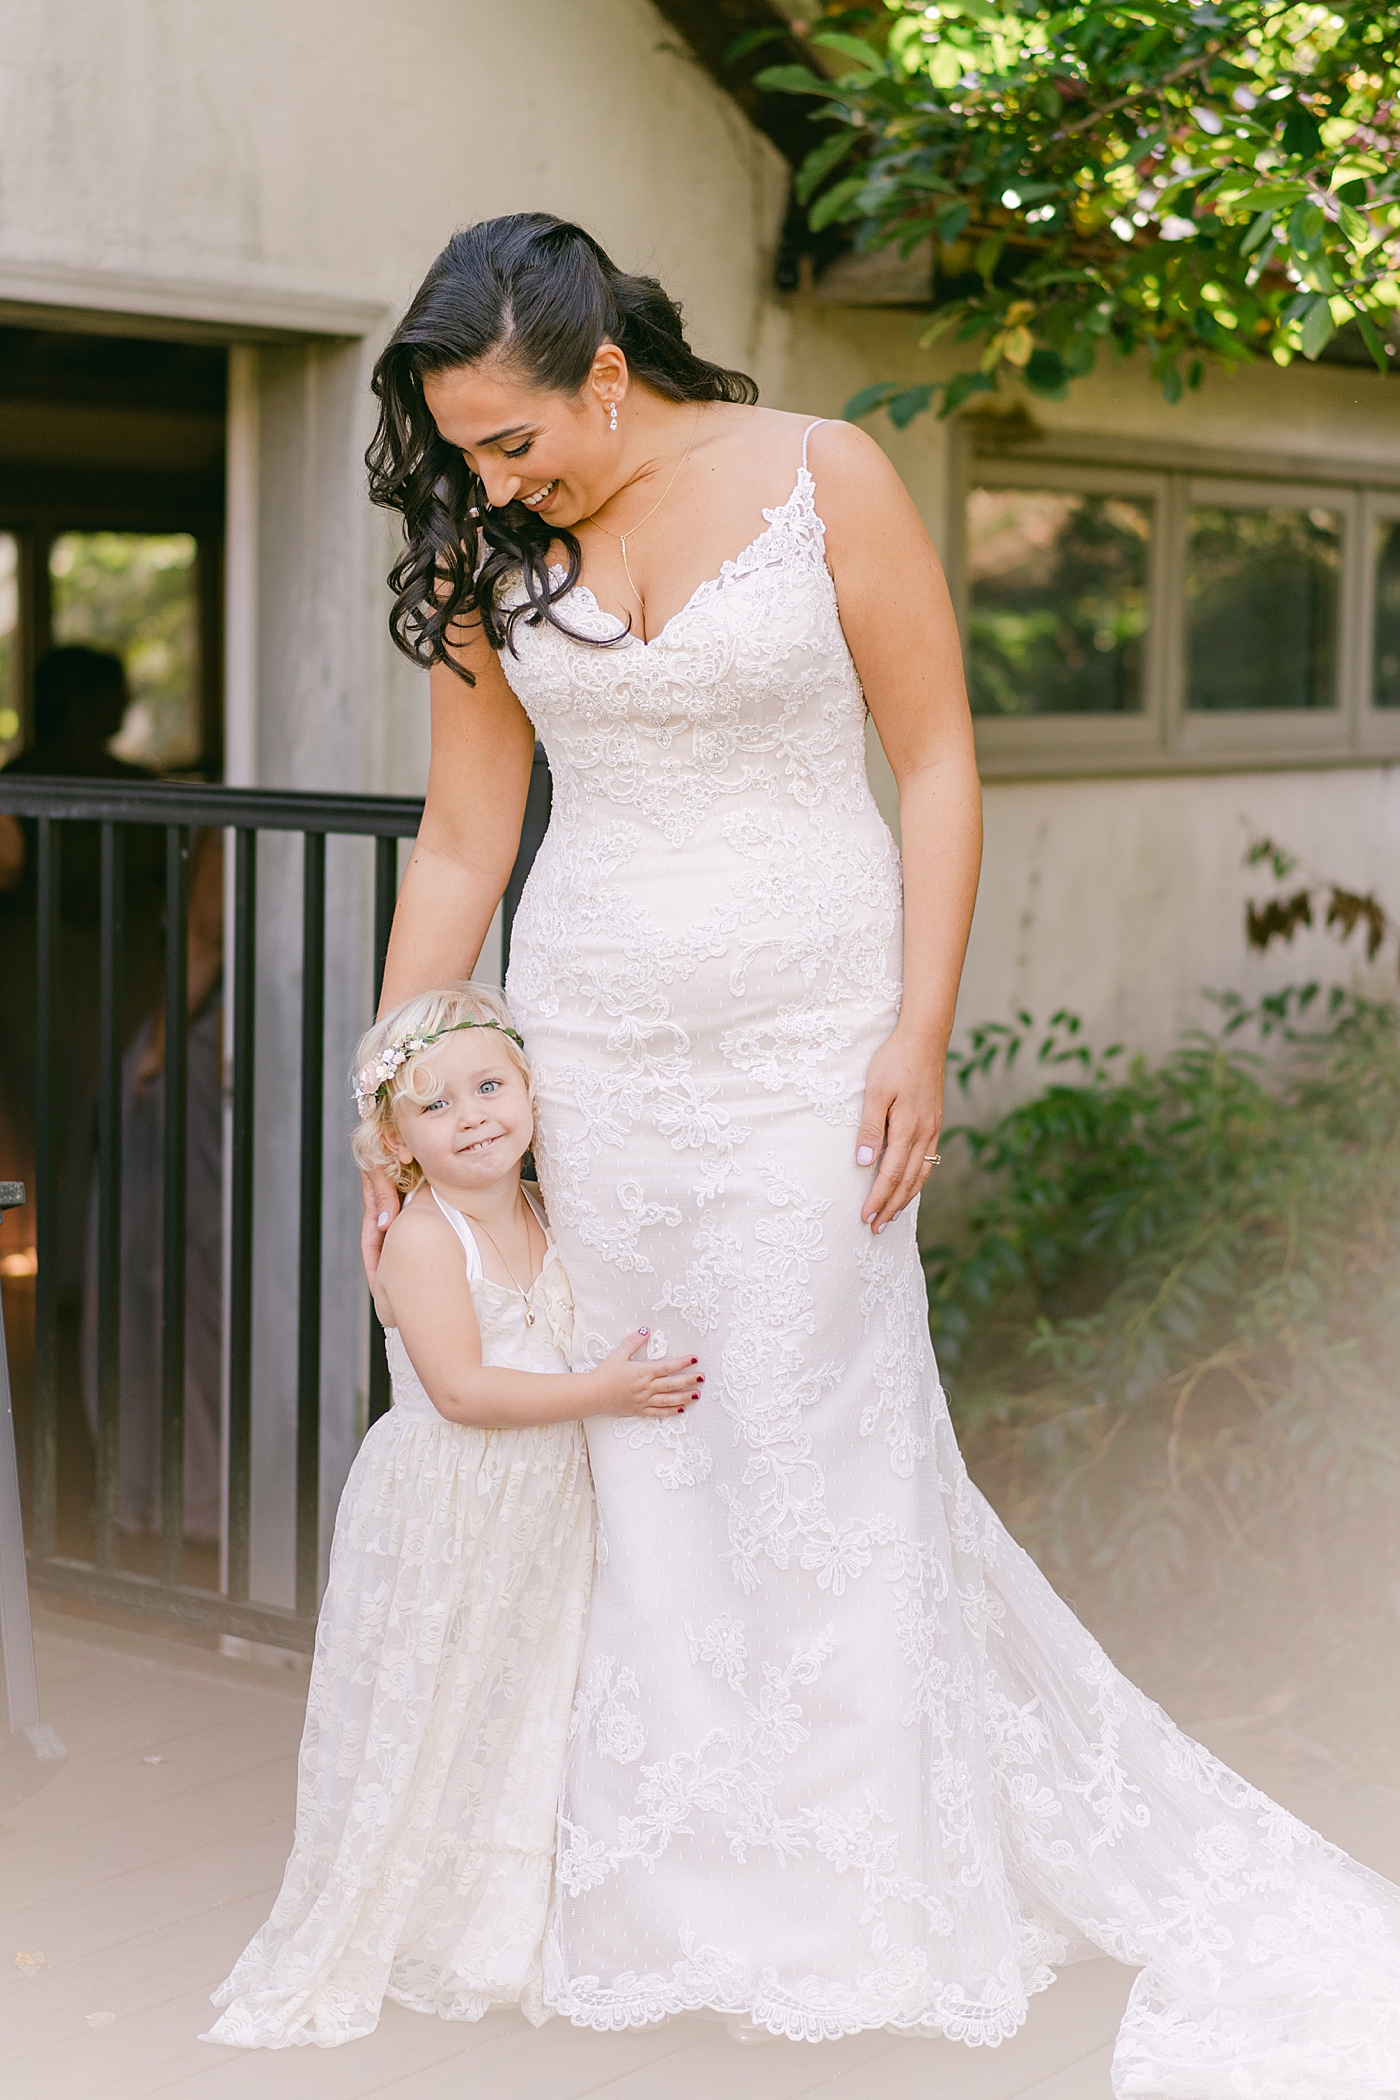 Bride standing with her flower girl | Photo by Hope Helmuth Photography